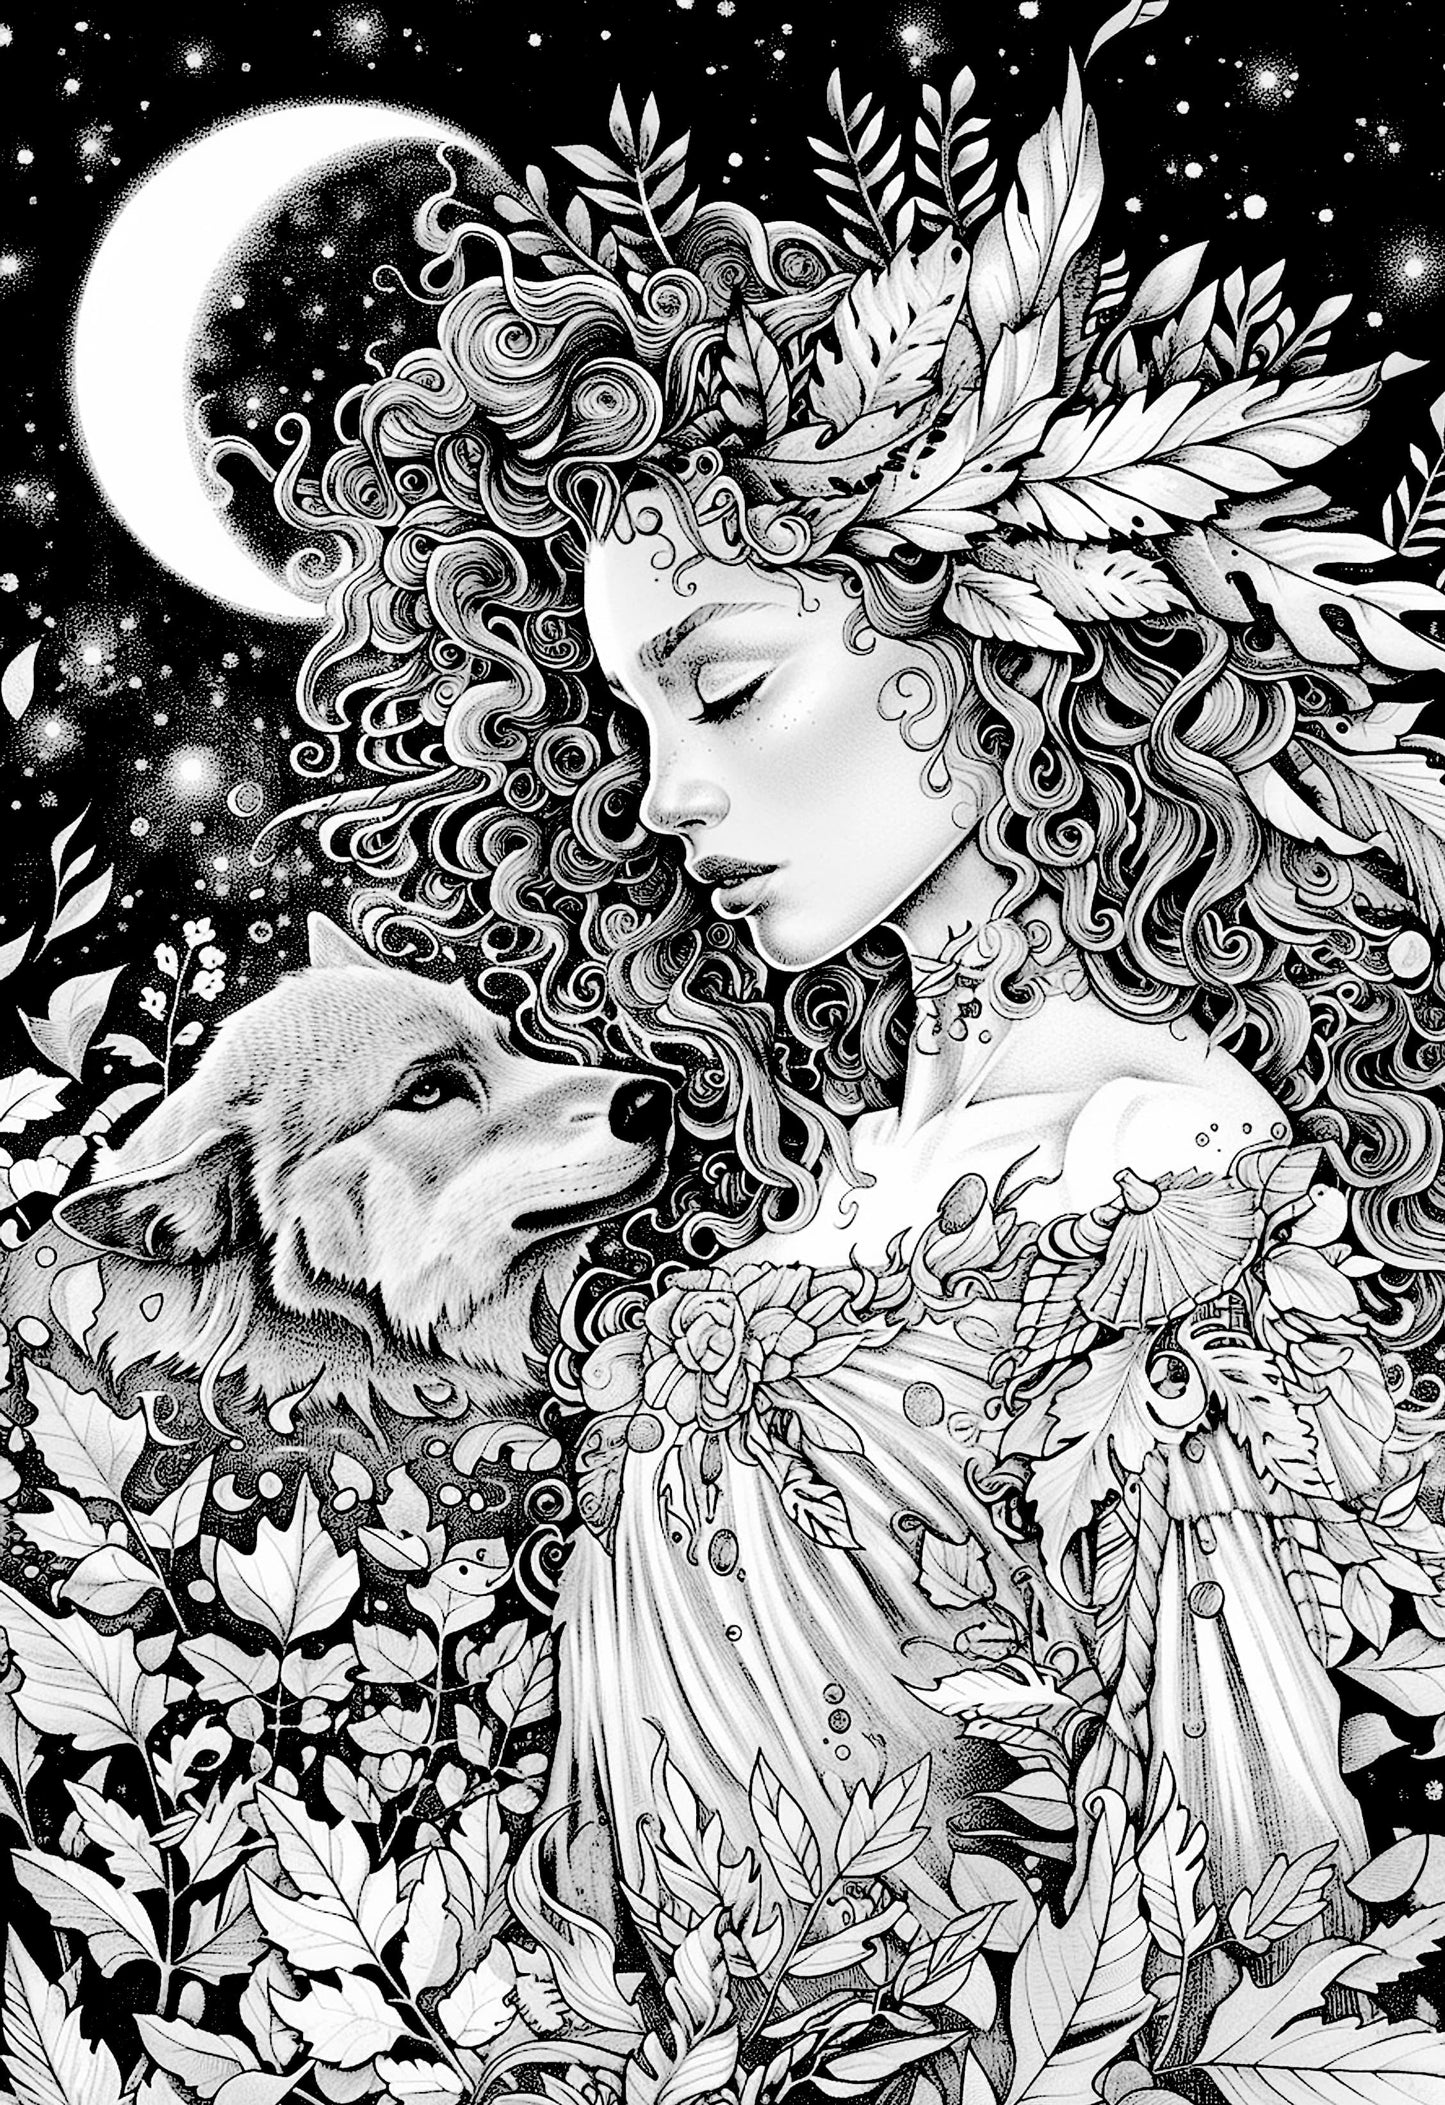 Moon Maiden Coloring Book Grayscale (Digital)